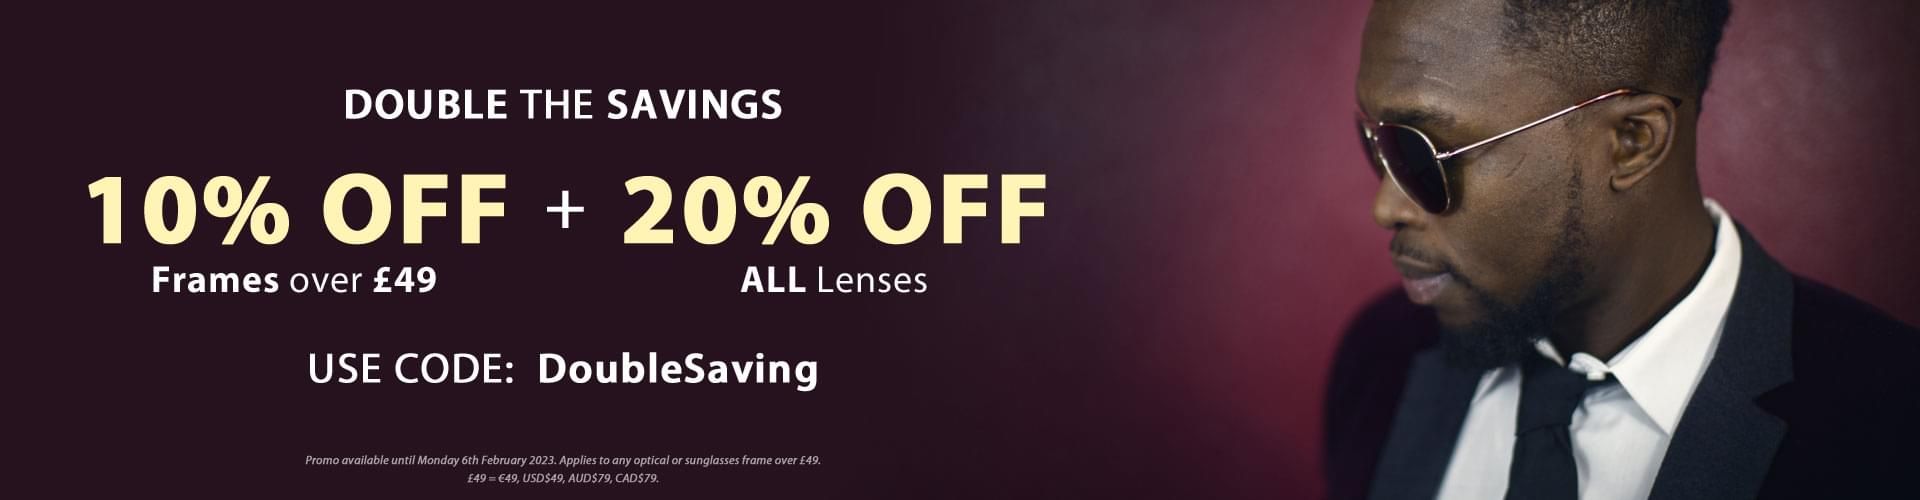 Double the Savings - 10% Off Frames + 20% Off Lenses